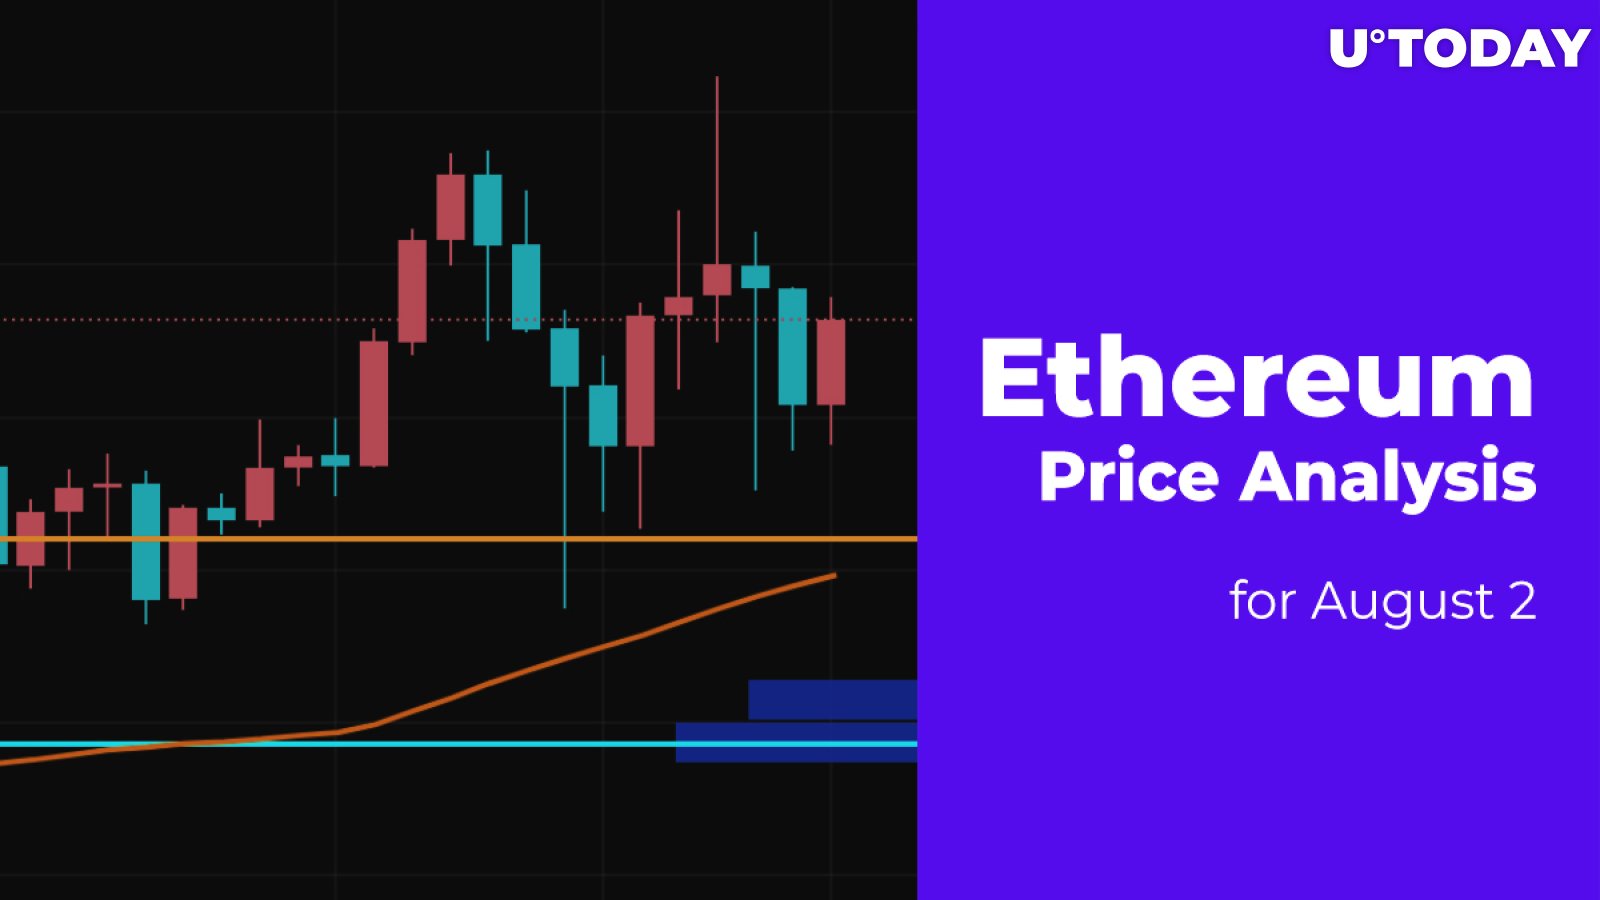 Ethereum (ETH) Price Analysis for August 2